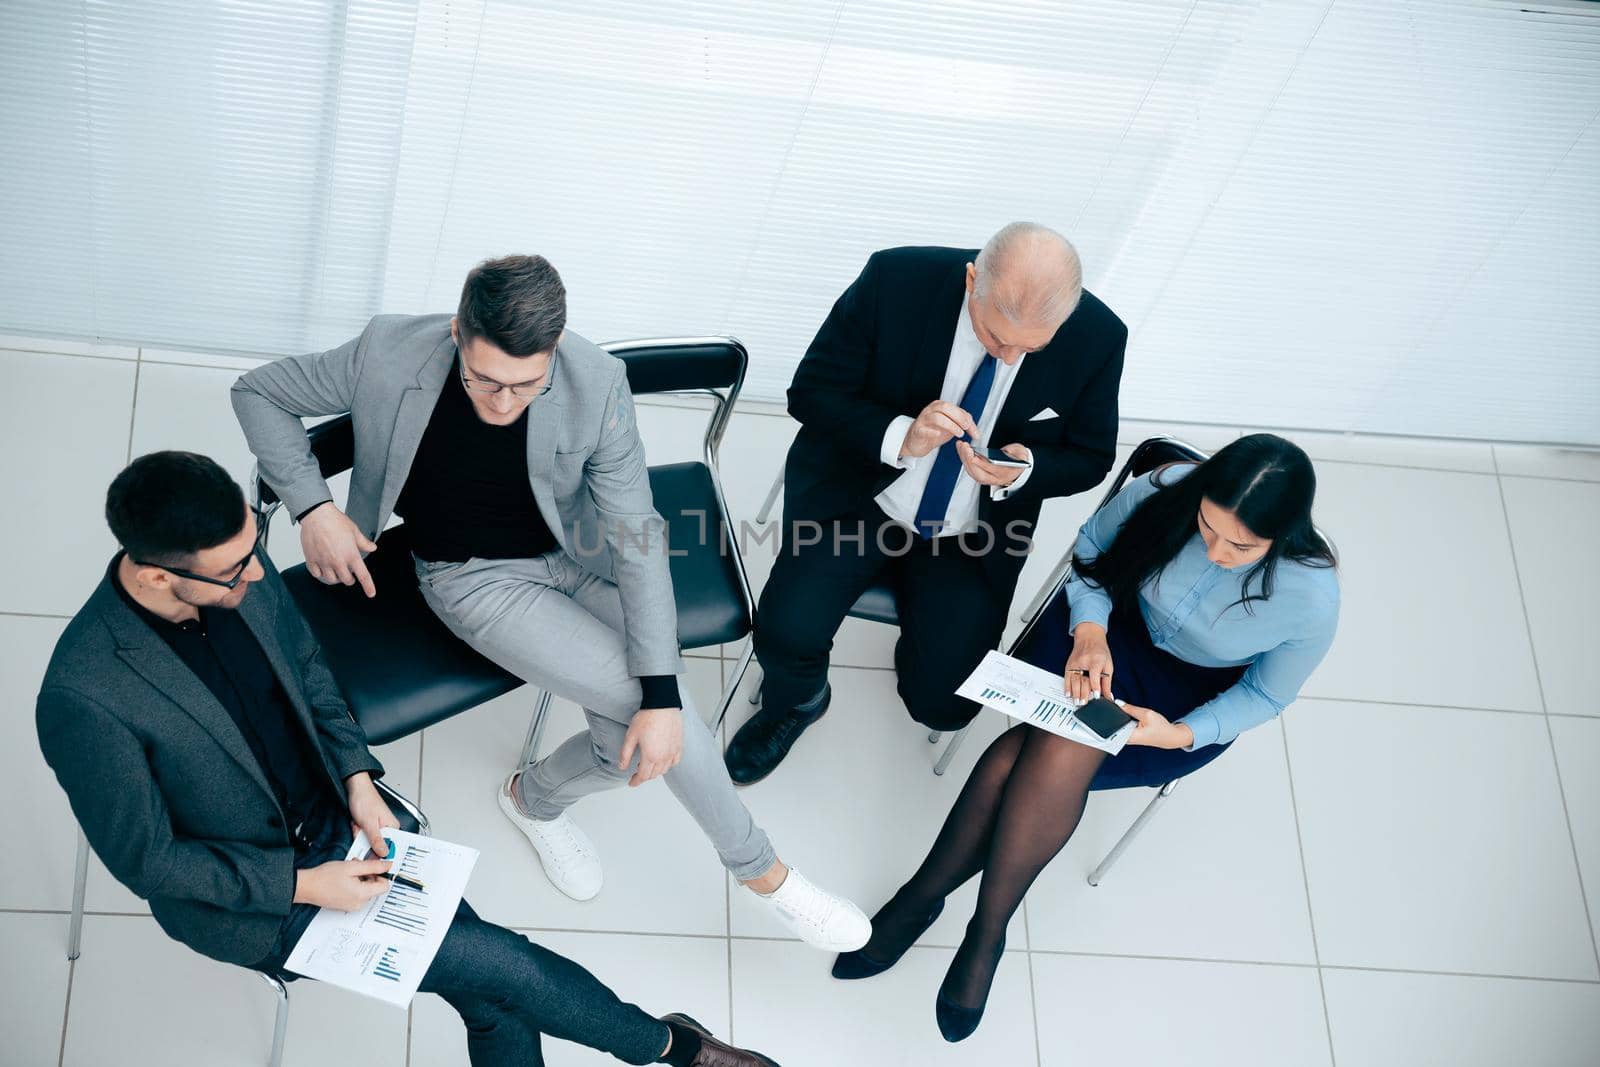 top view. businessman using a smartphone during a work meeting by SmartPhotoLab